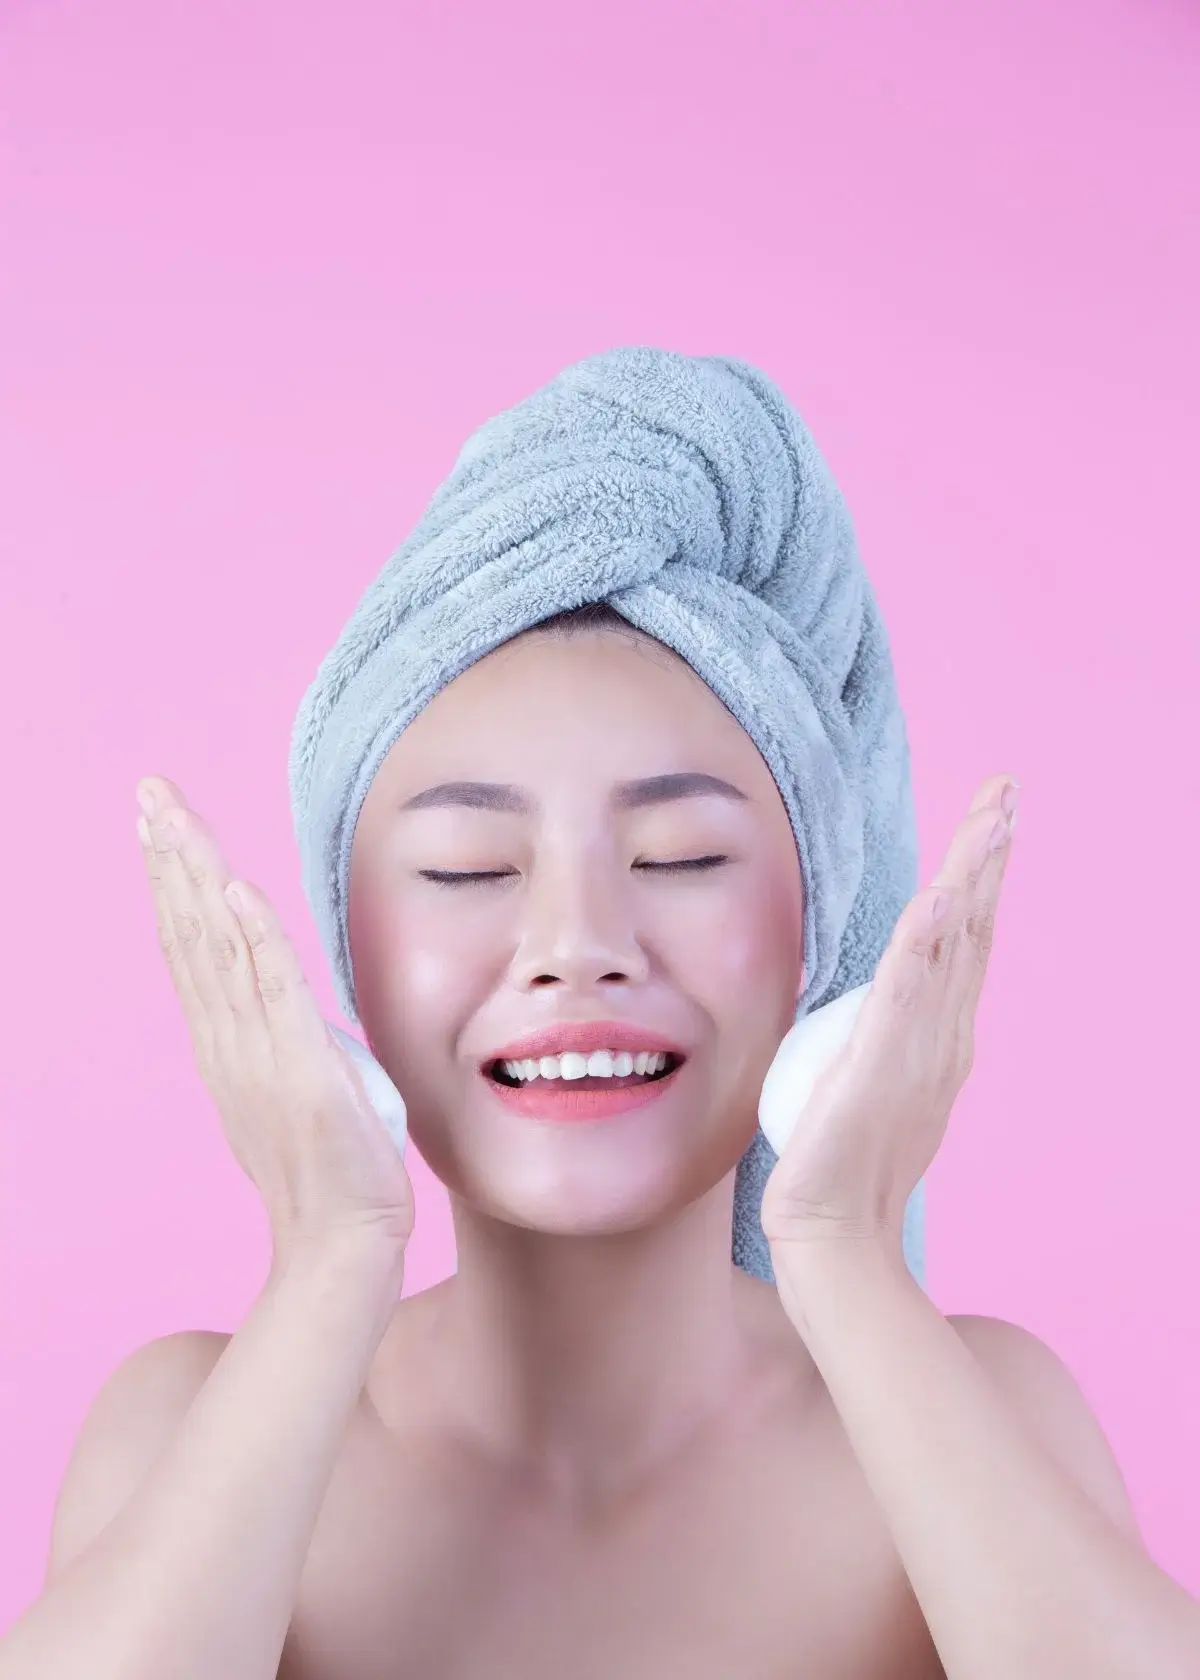 How to choose the right japanese face wash?